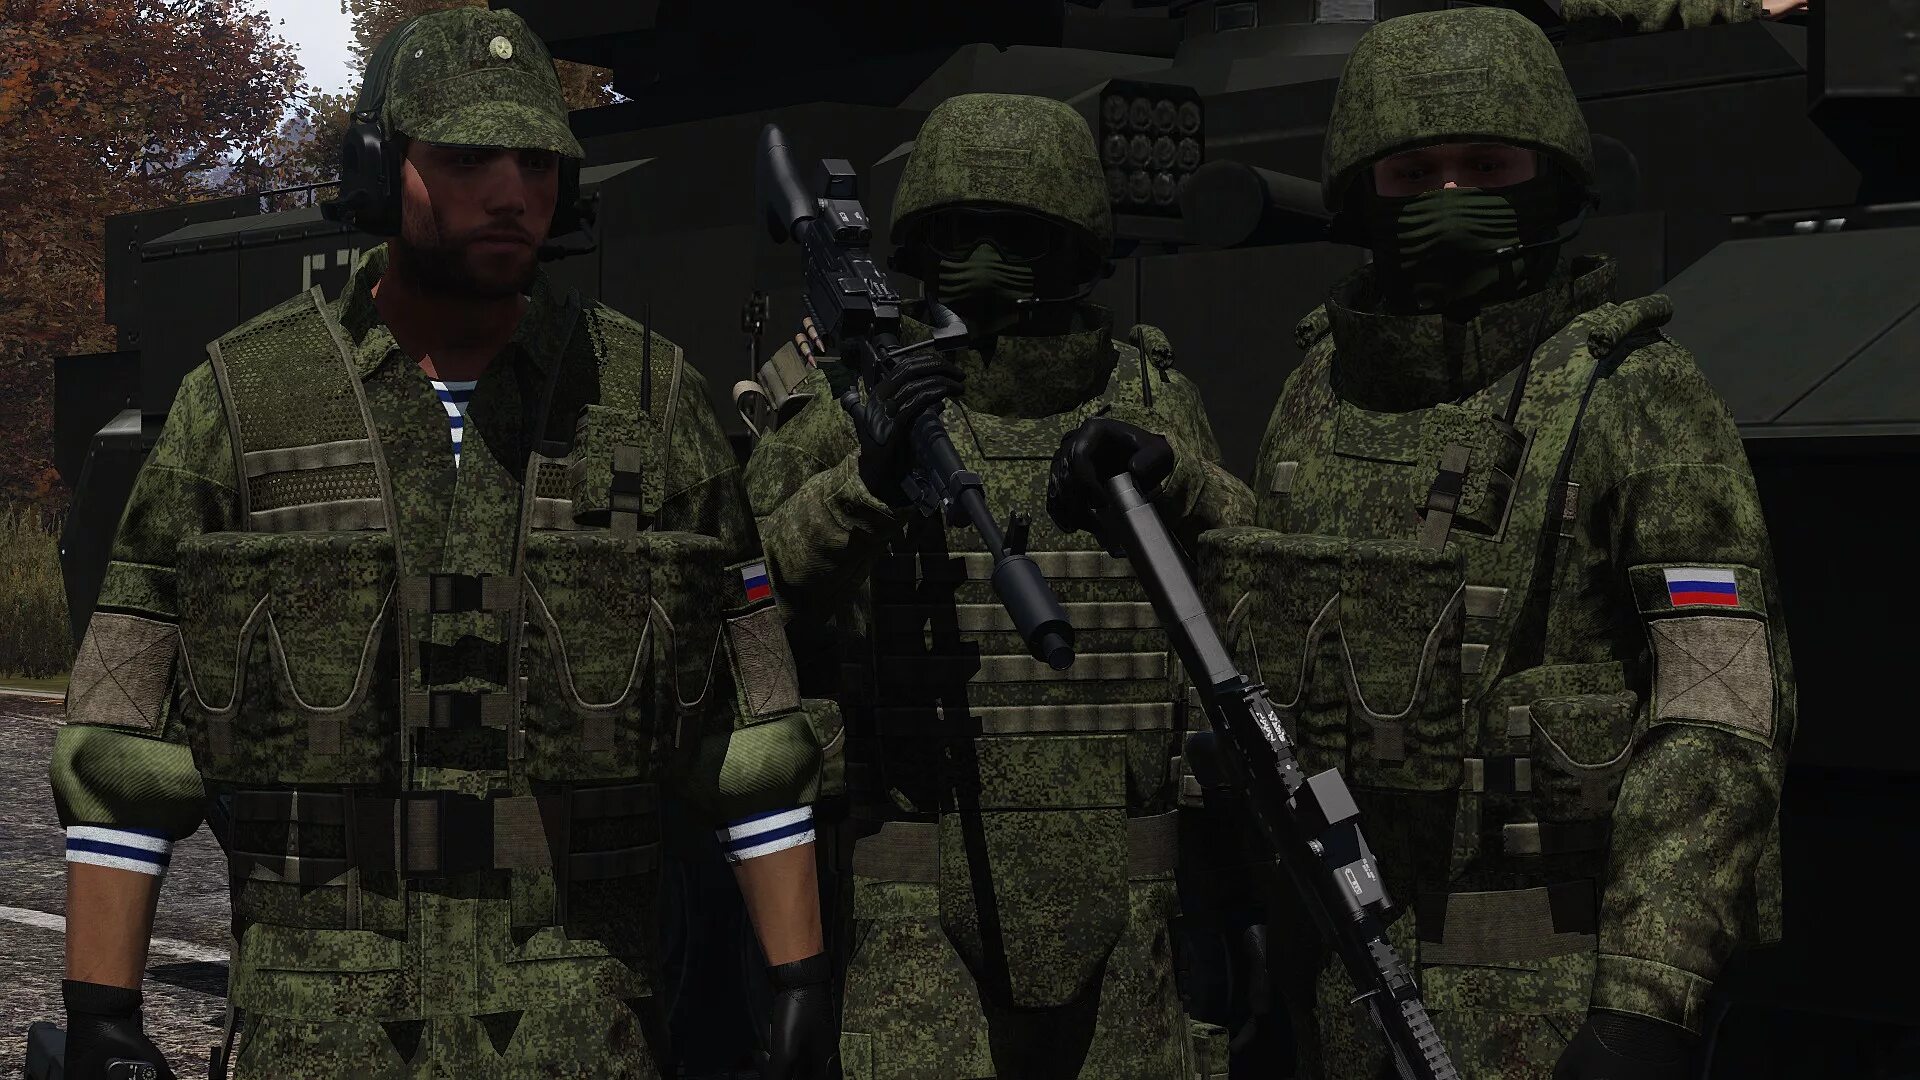 Арма 3 армия РФ. Arma 3 армия РФ 2035. Арма 3 Russian Armed Forces 2035. Армия РФ Арма 2.